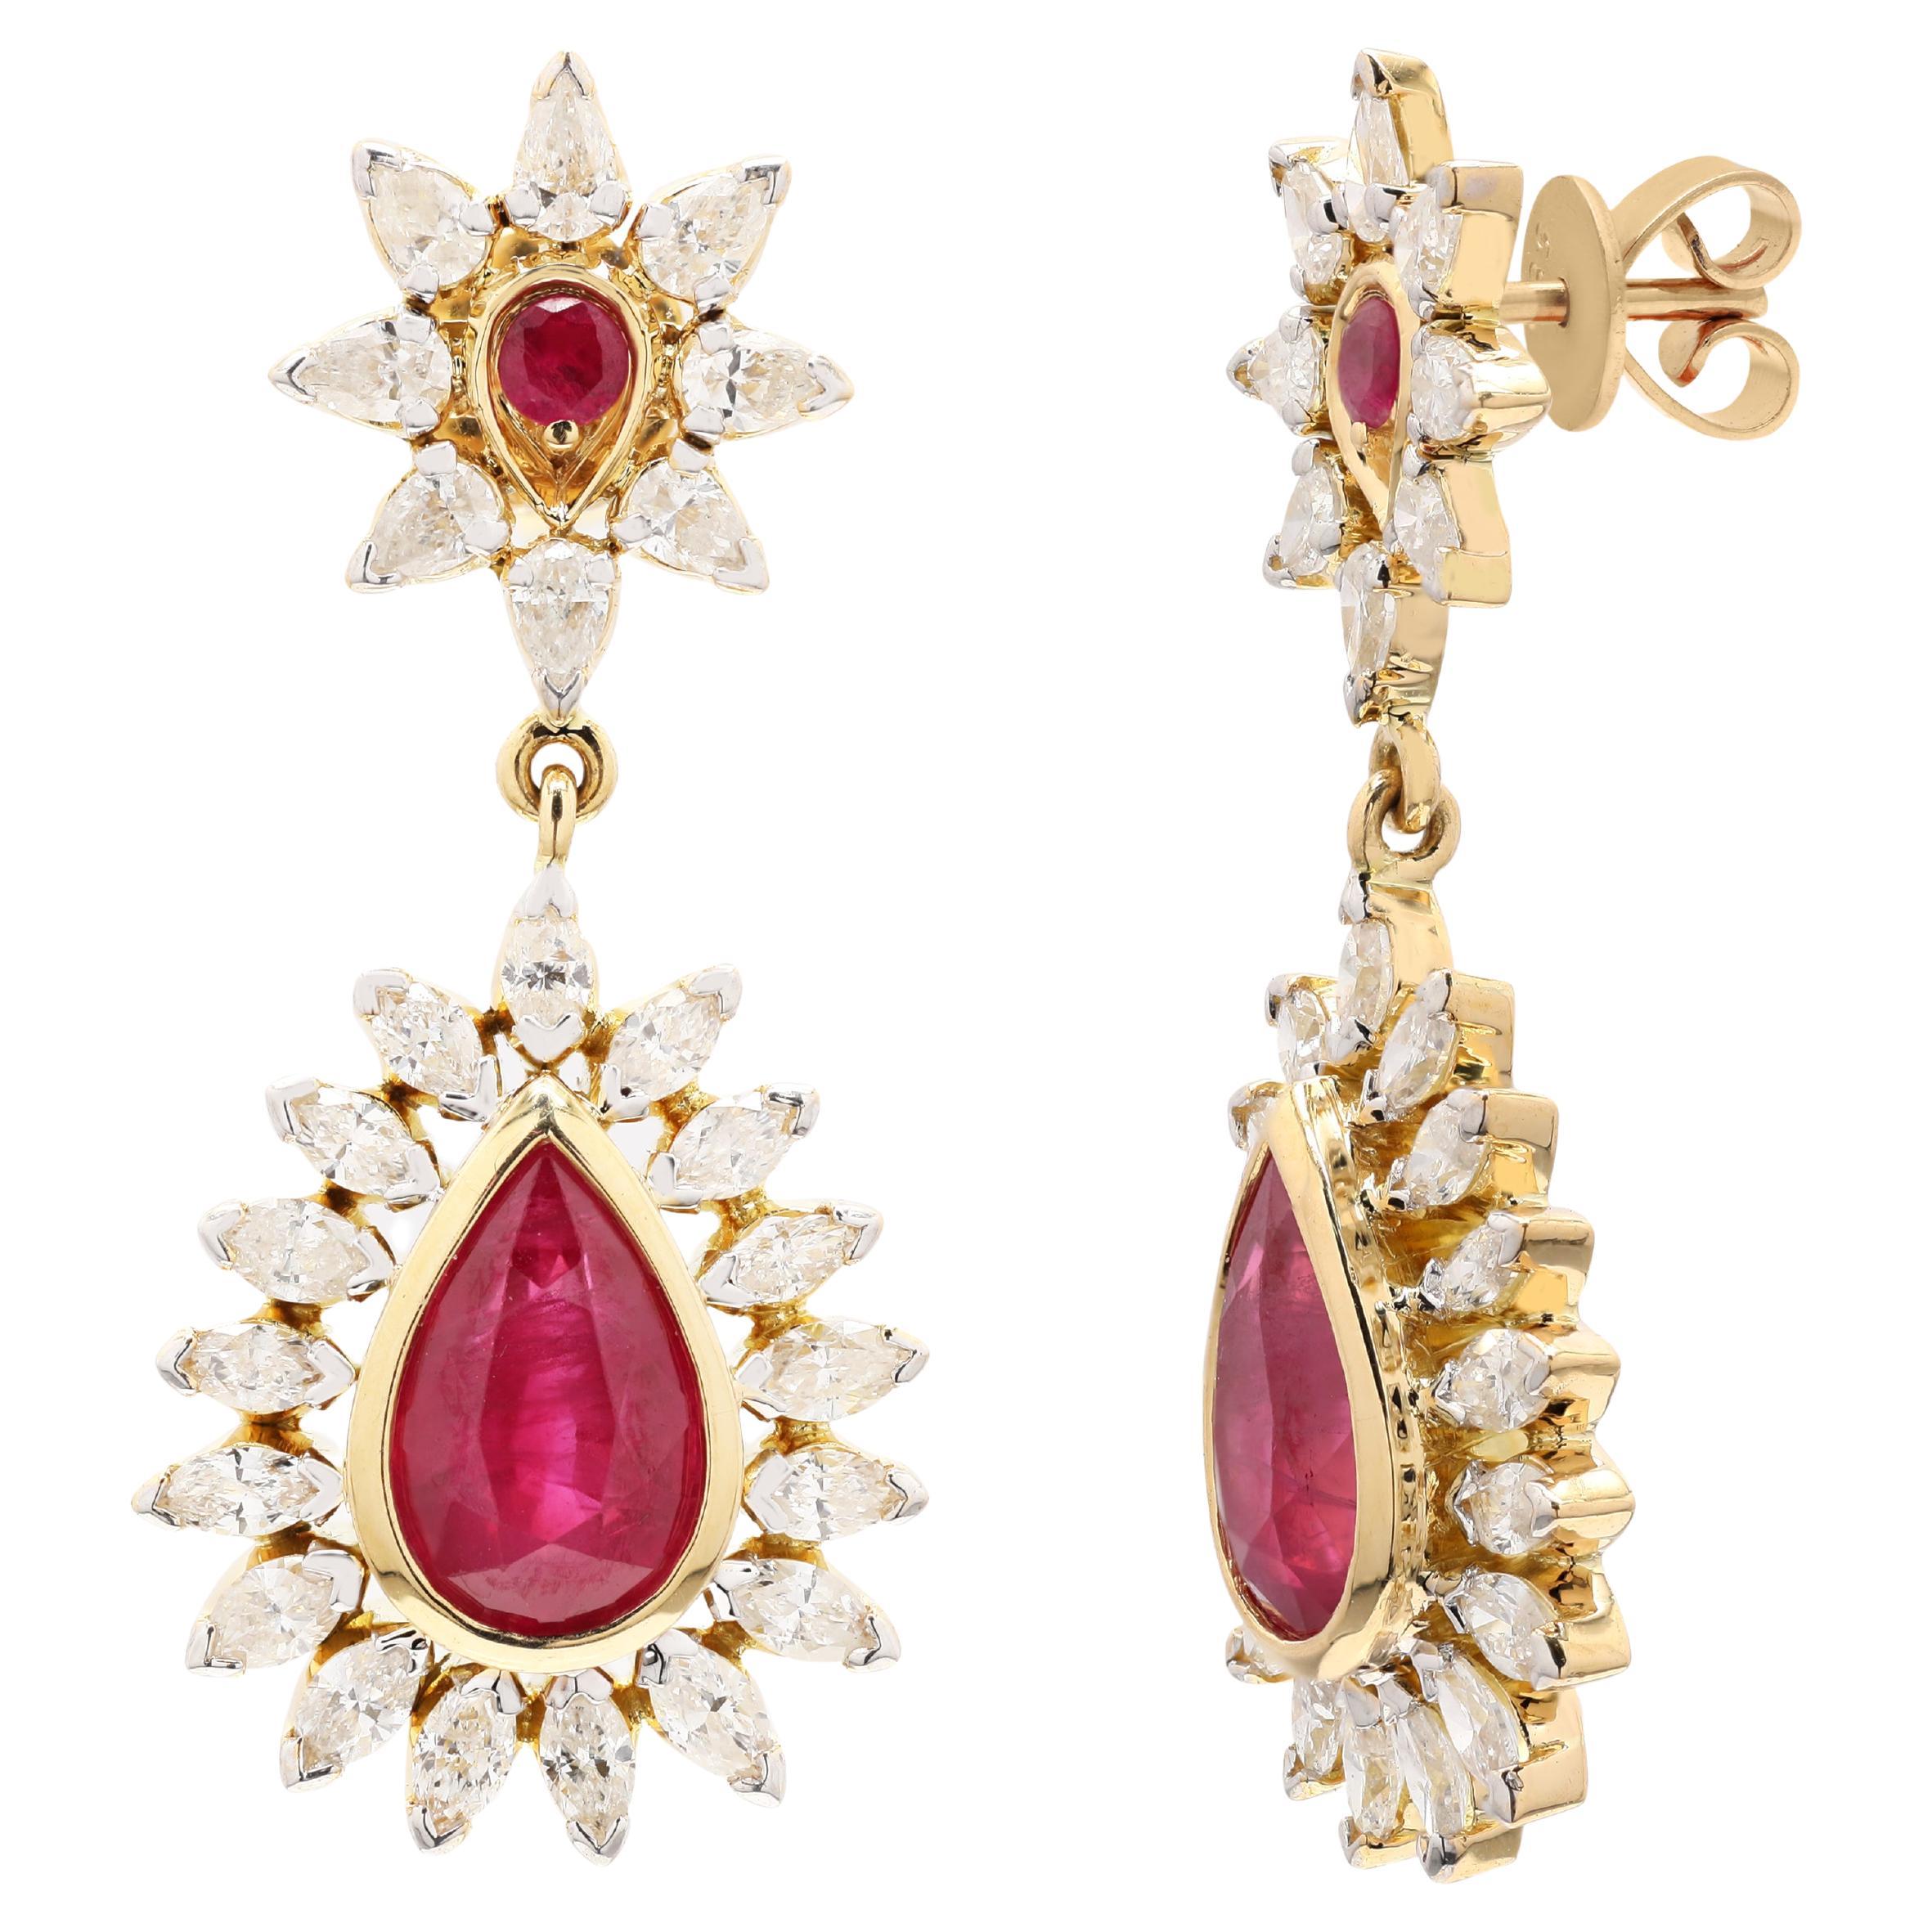 4.37 Carat Ruby Wedding Earrings and Diamonds Studded in 18k Solid Yellow Gold